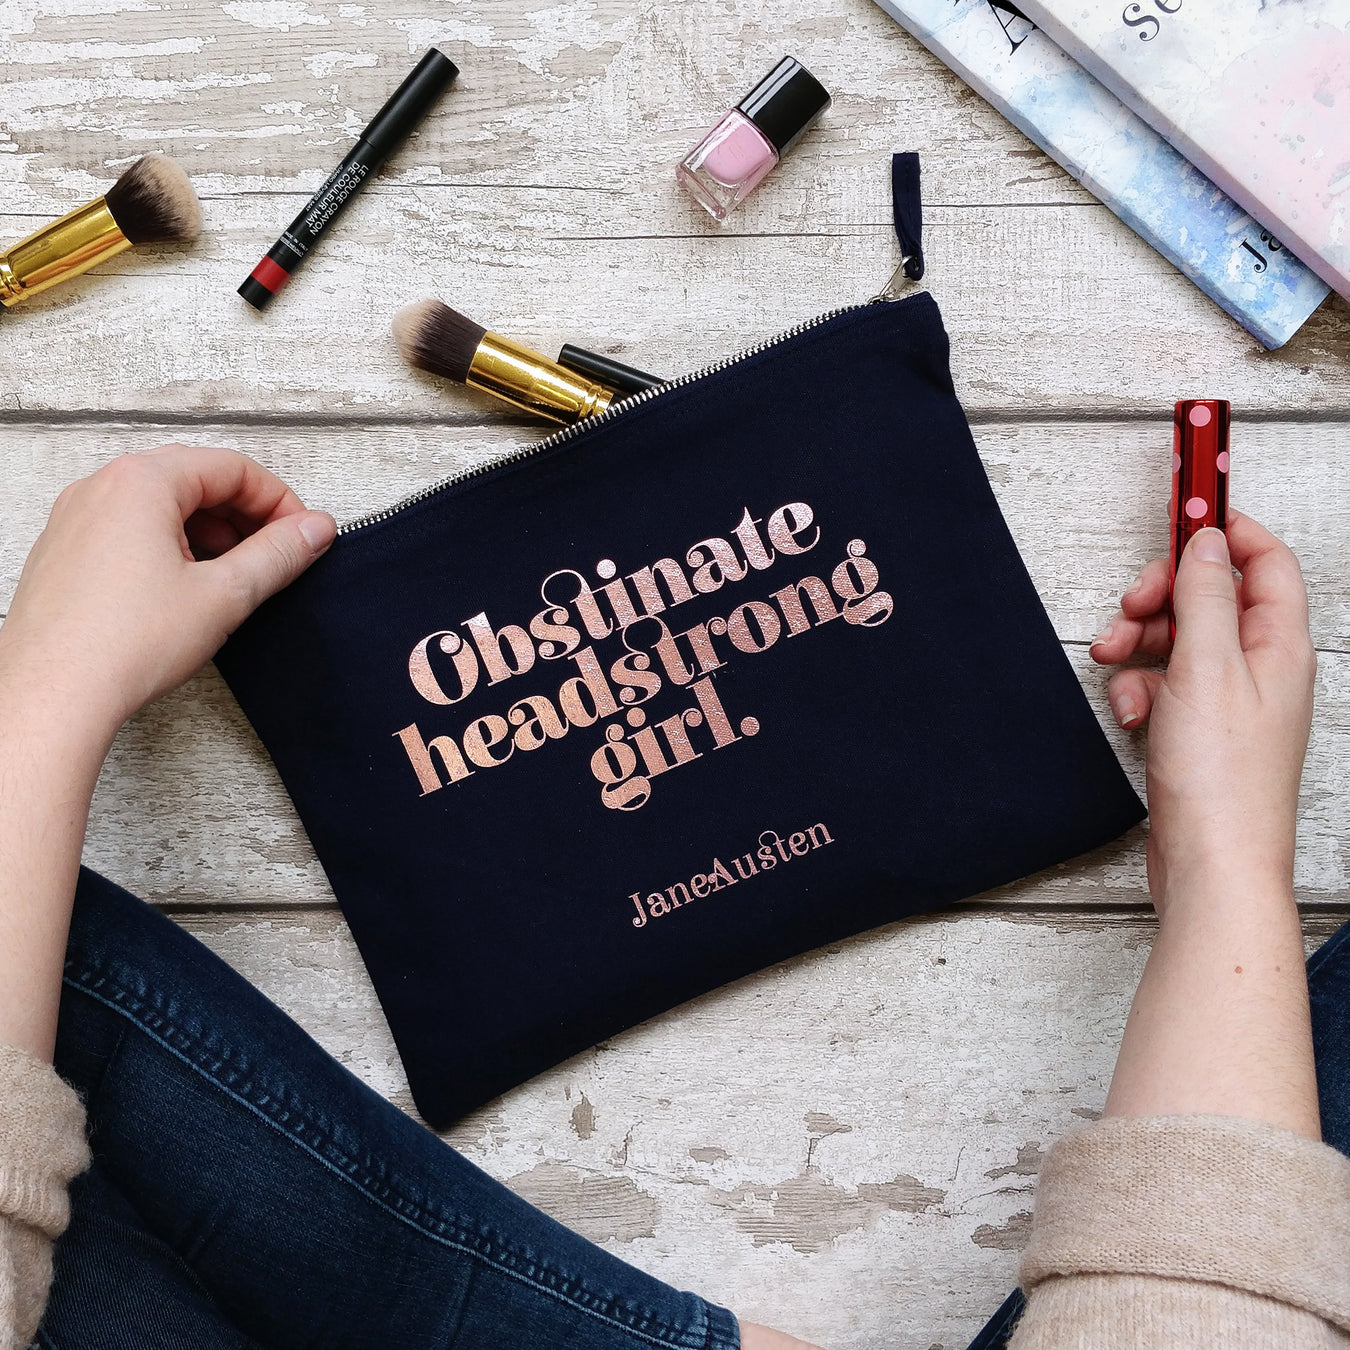 bookish accessories obstinate headstrong girl navy and rose gold make up bag